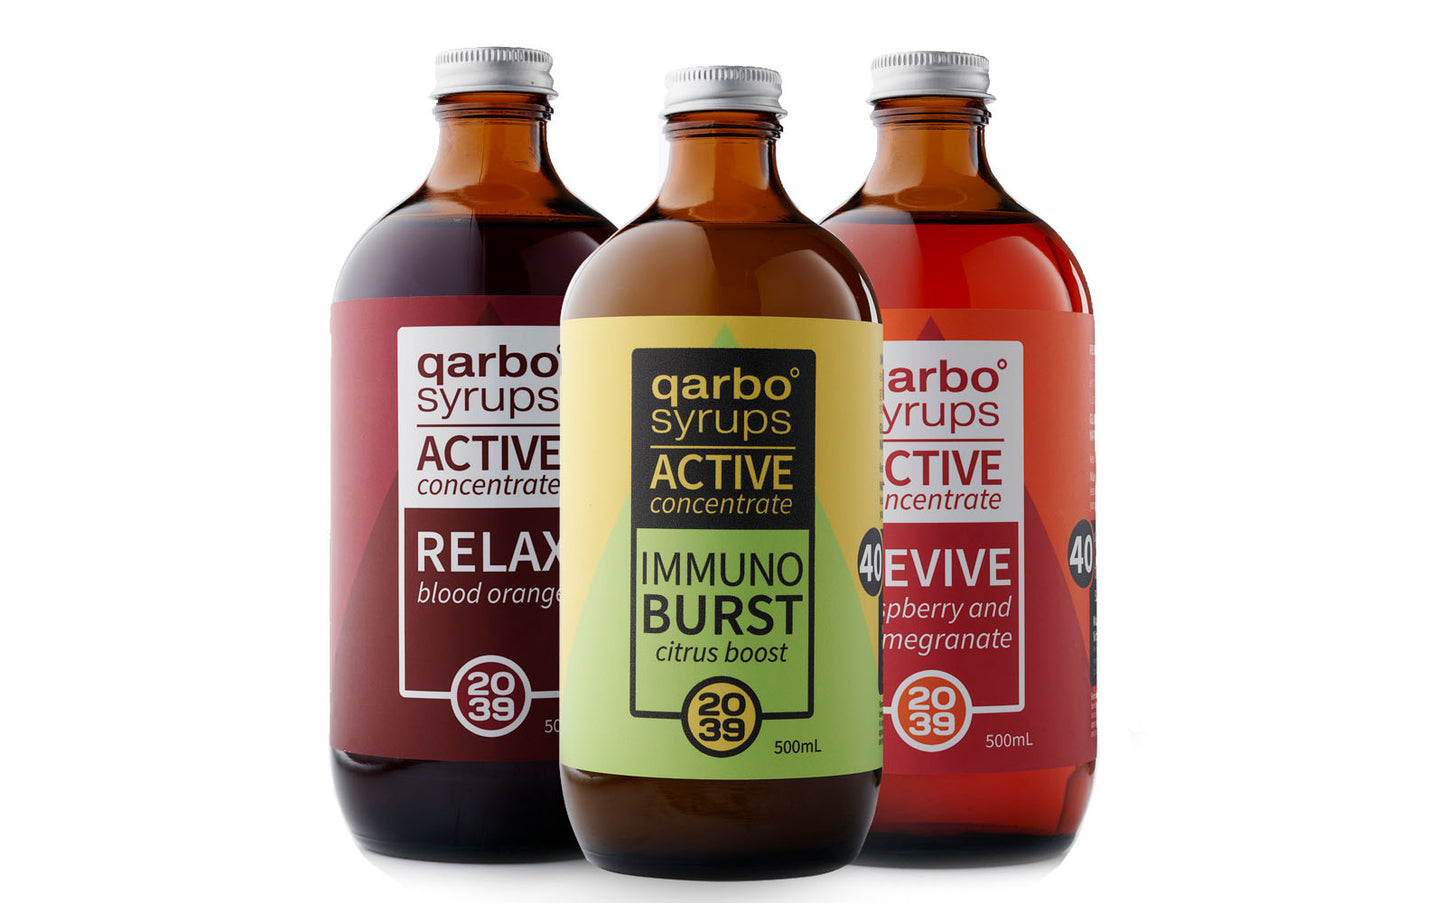 qarbo˚syrups - ACTIVE CONCENTRATES - Mixed Pack of 3